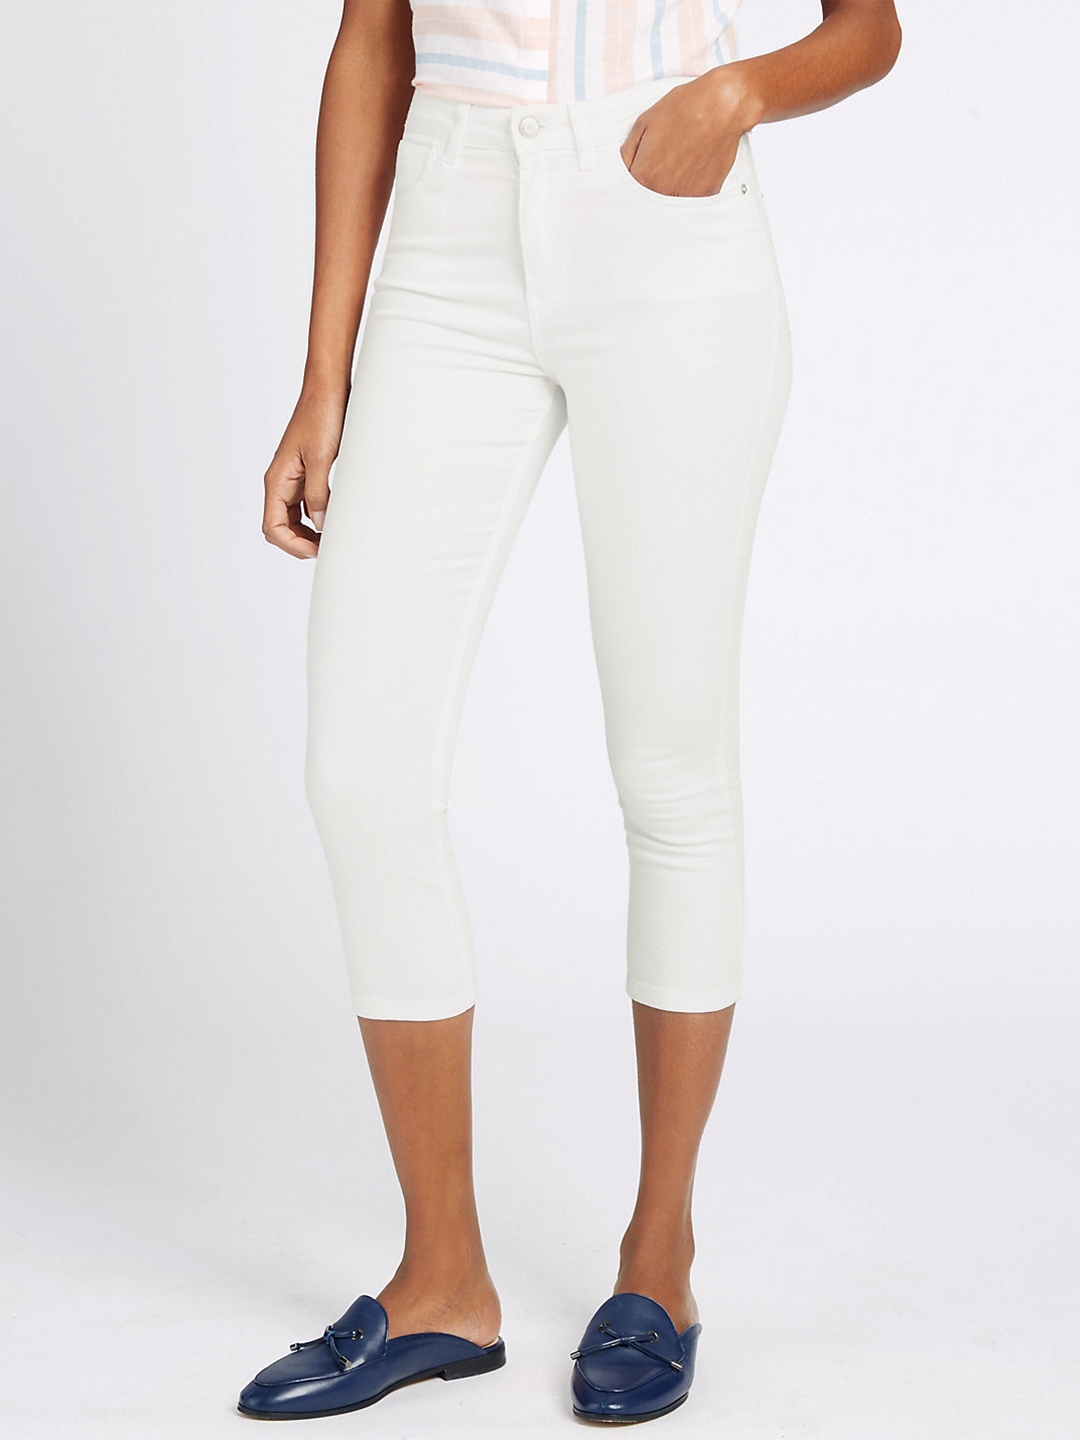 Buy Marks & Spencer Women White Super Skinny Fit Clean Look Stretchable ...